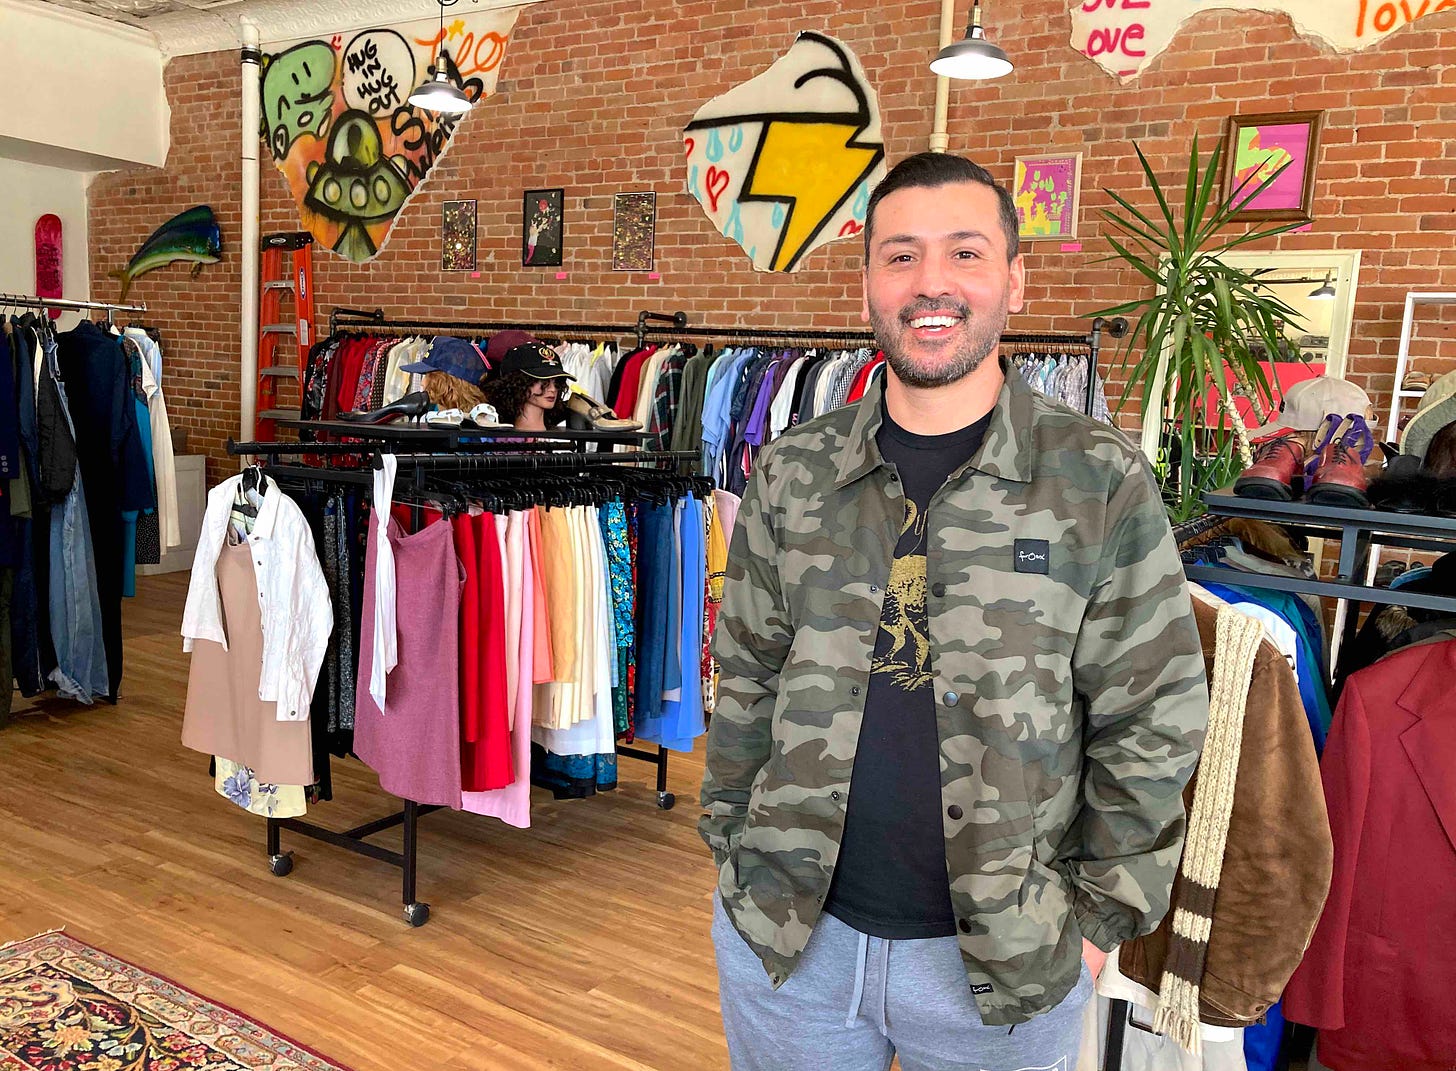 smiling man in green camo jacket and grey sweats in vibrant room full of clothing racks and exposed brick wall